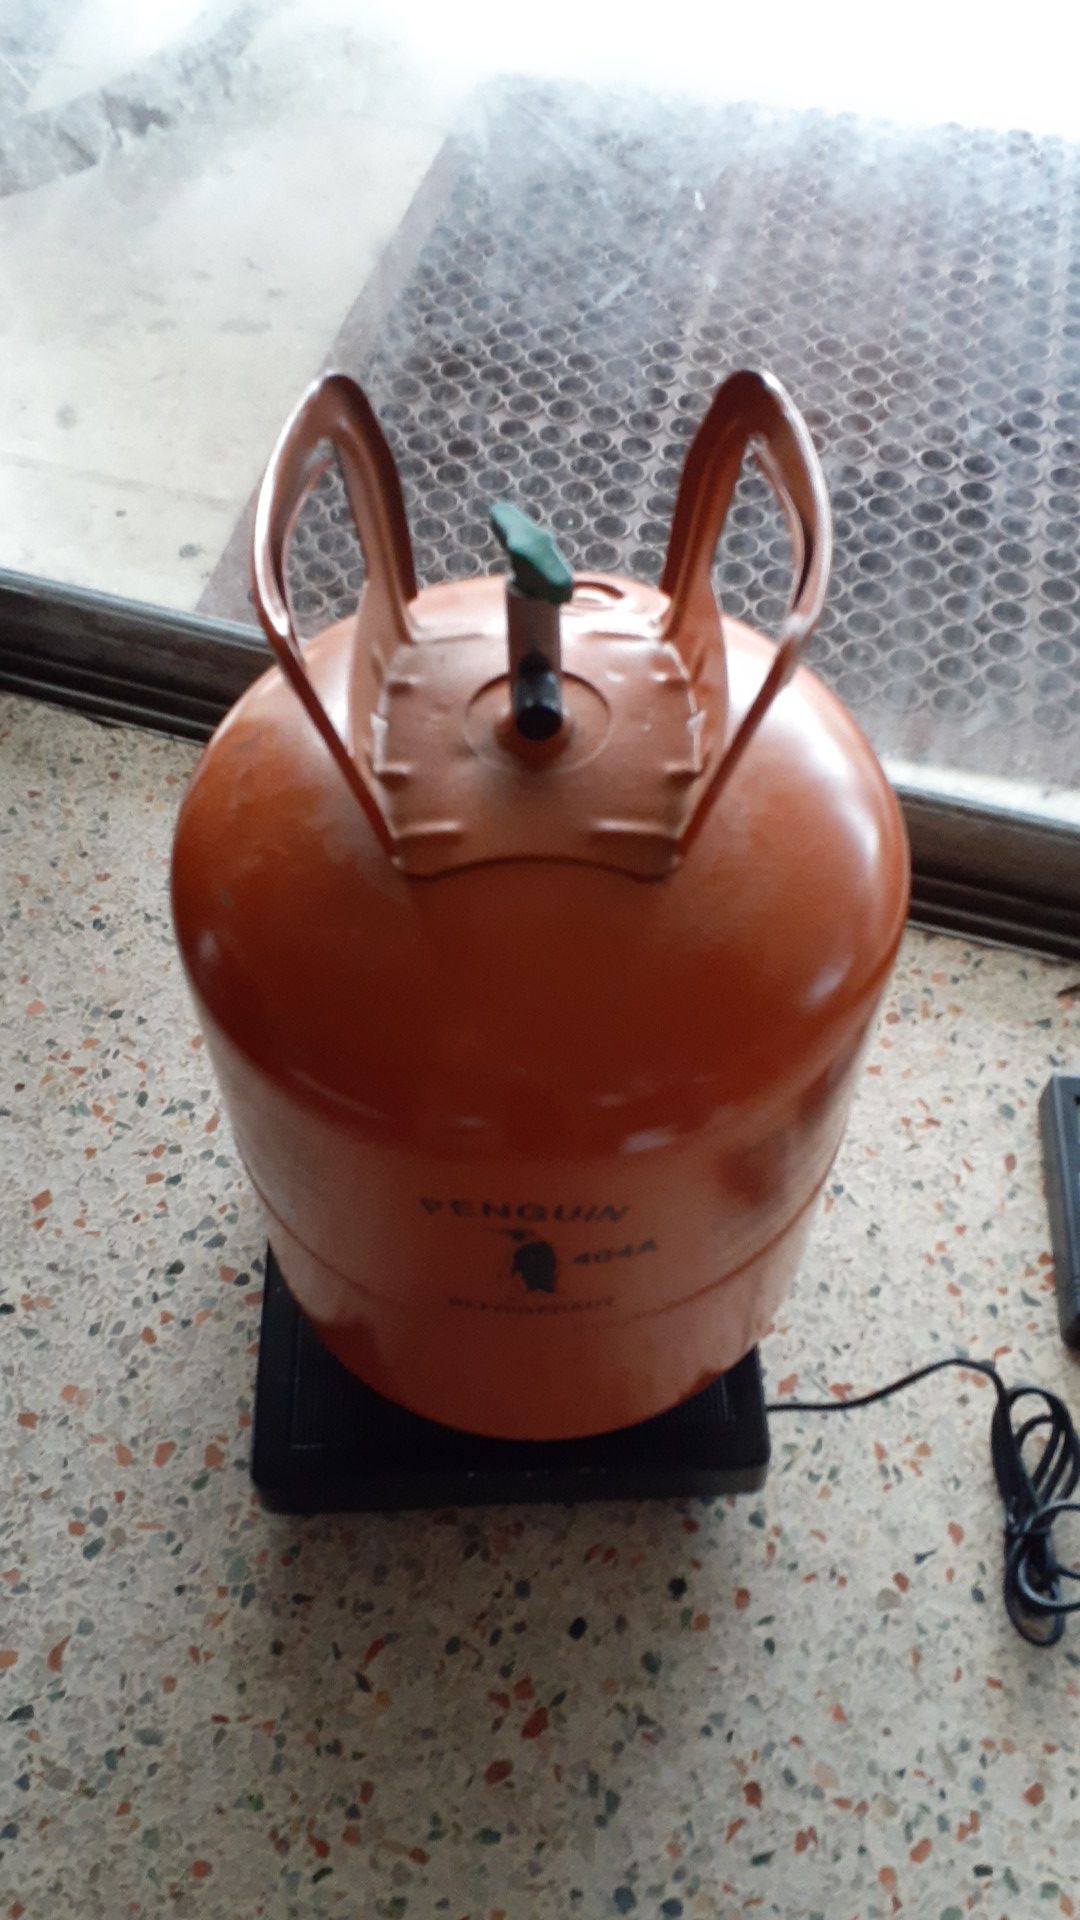 FREON 404A REFRIGERANT COOLANT weighs 18.4 pounds "LOOKS GREAT" NO OFFERS, PRICE IS FIRM